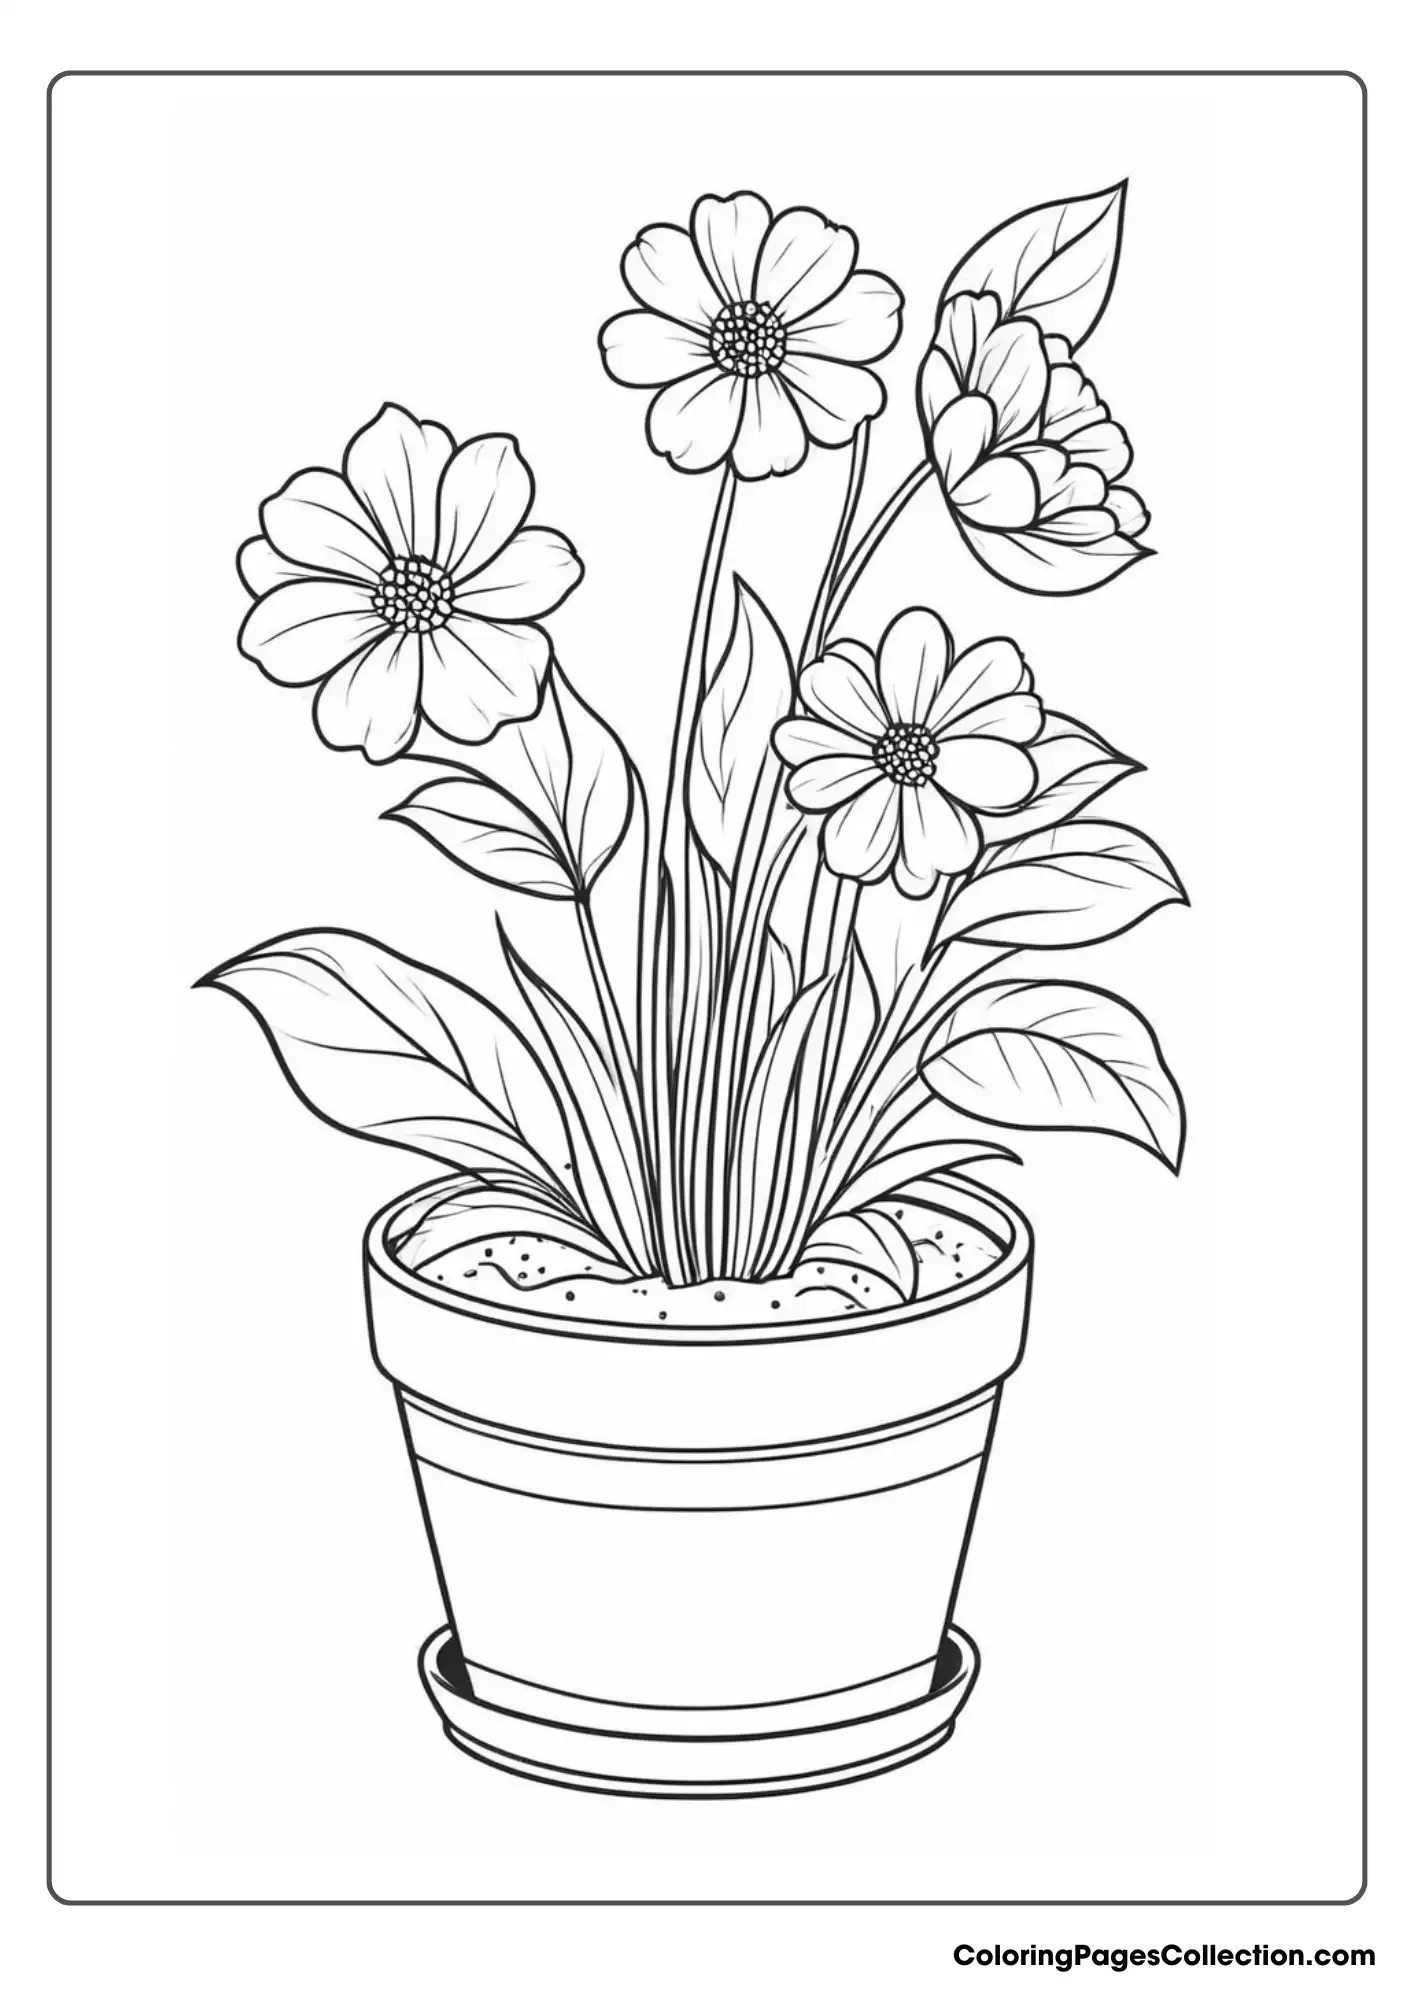 Flowers In A Pot Coloring Page